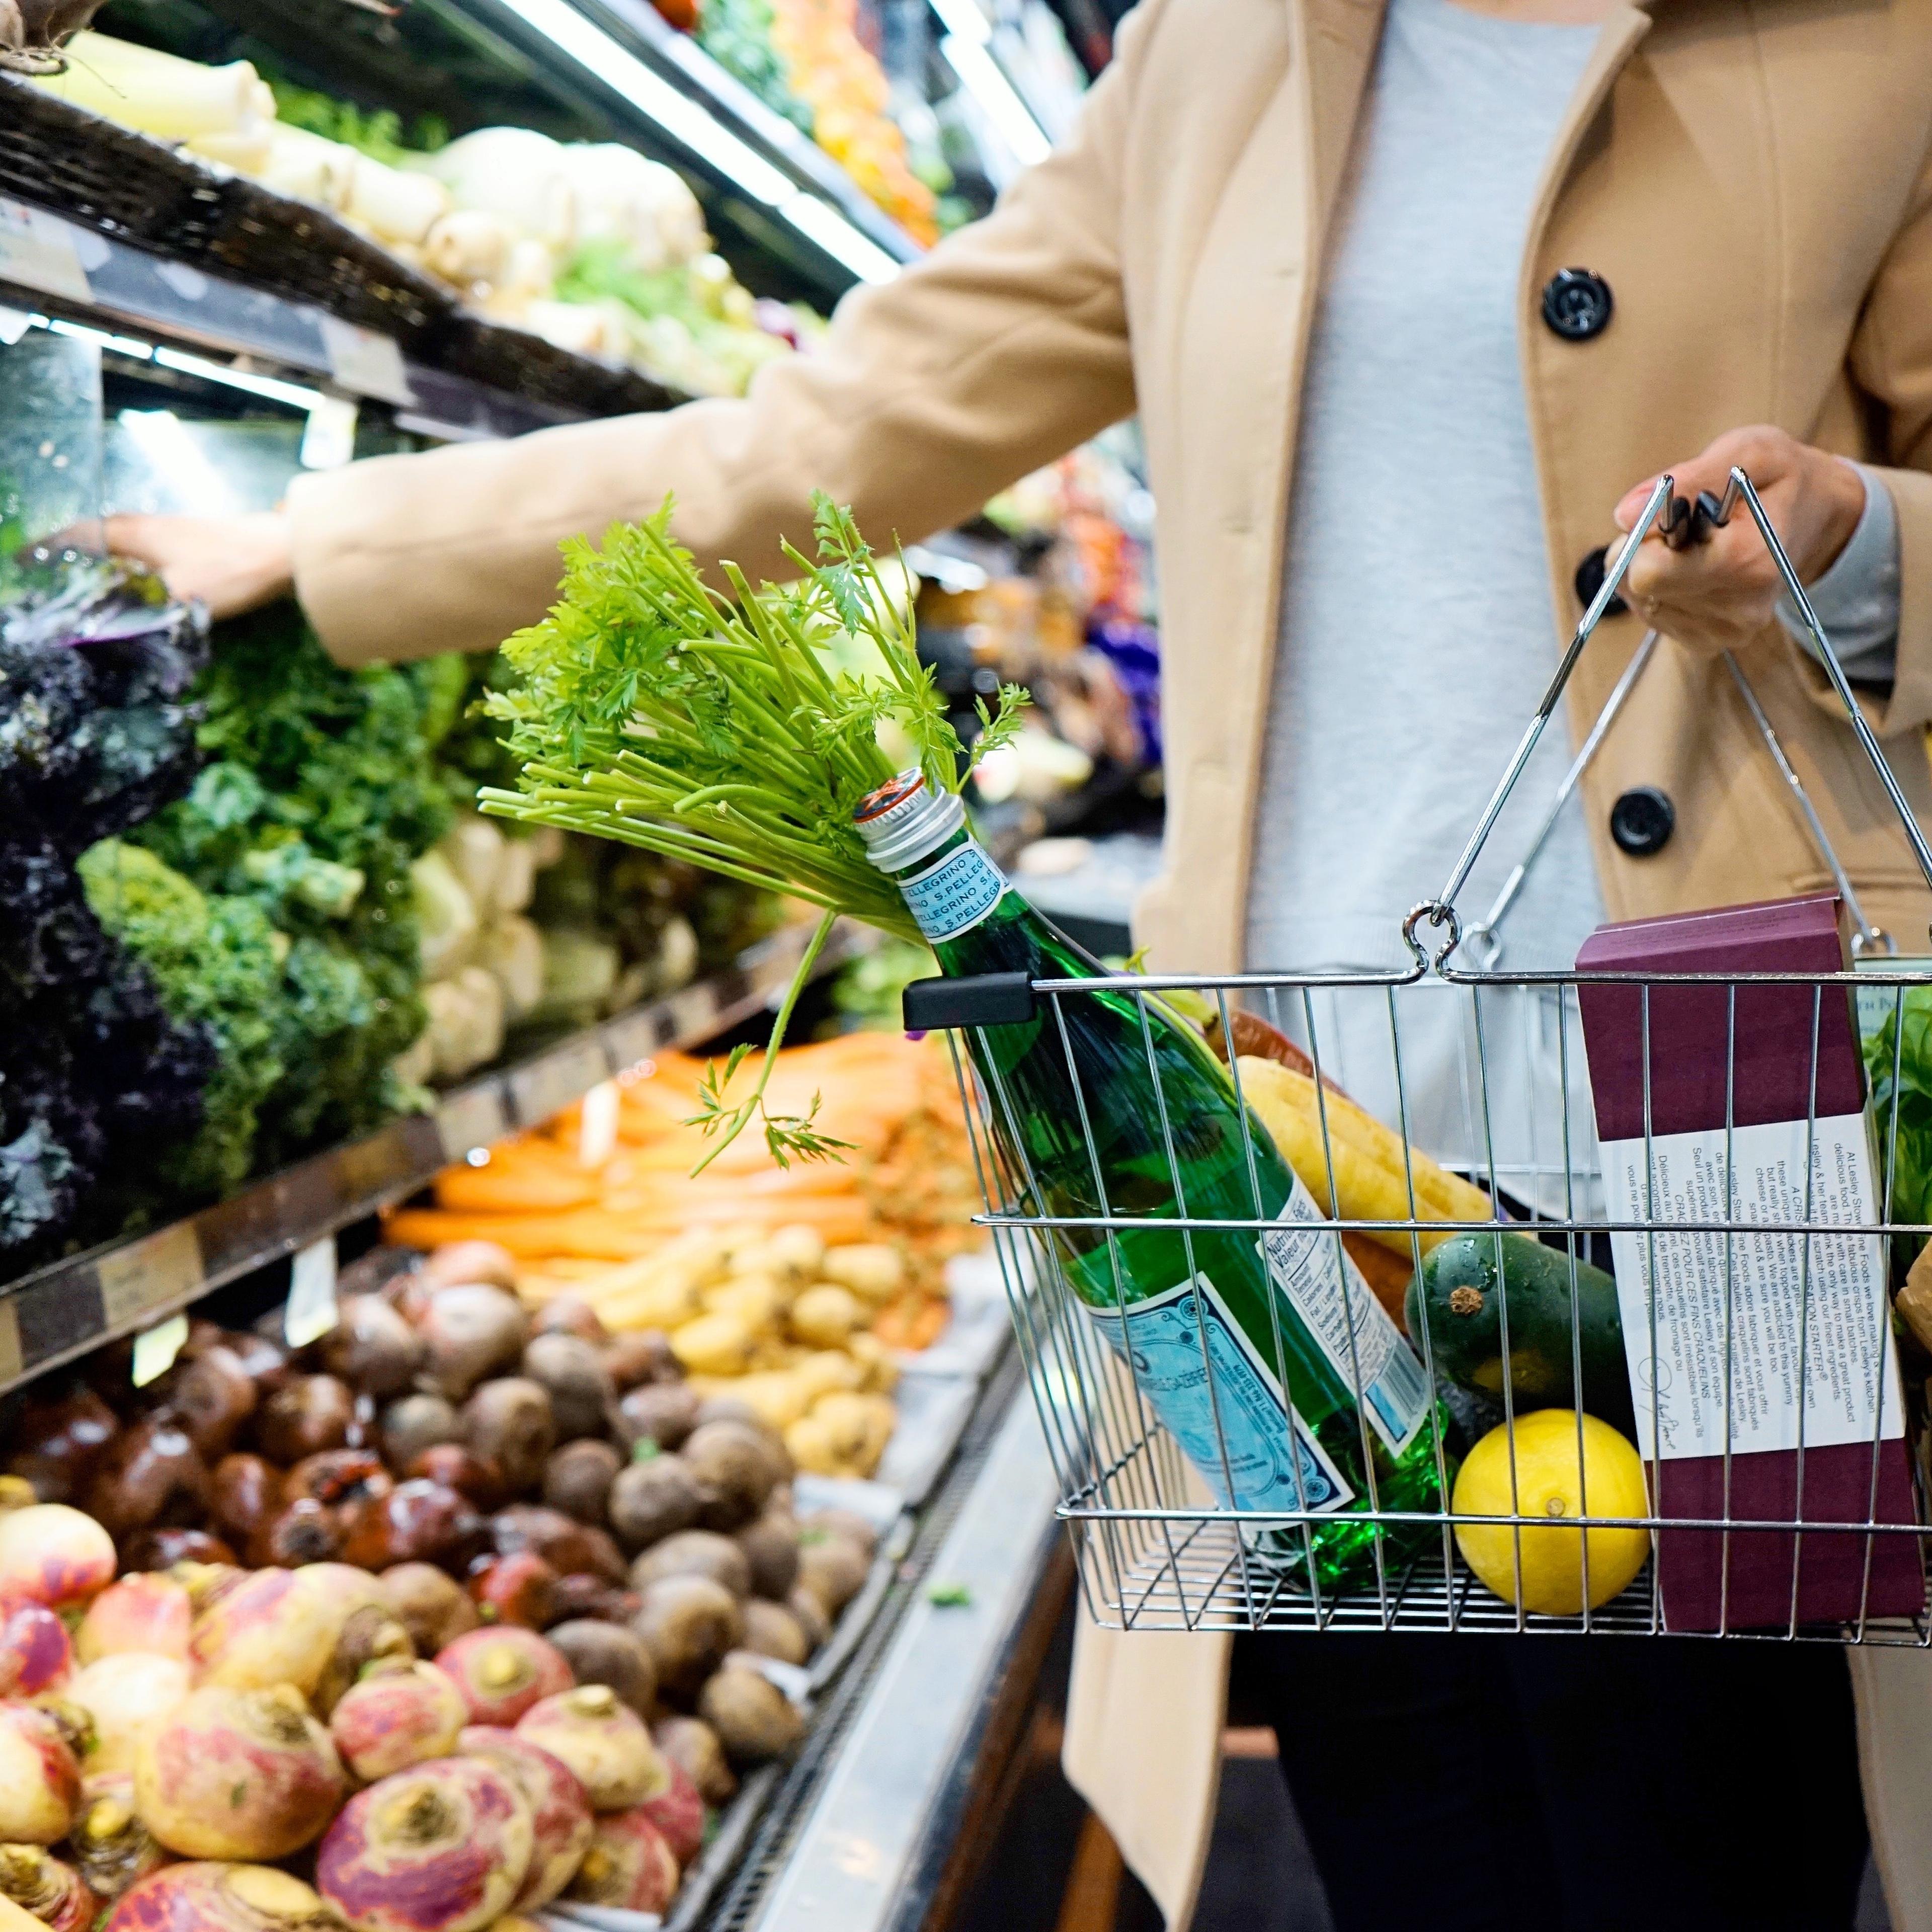 A person in a grocery store carrying a shopping basket with vegetables reaching for kale.